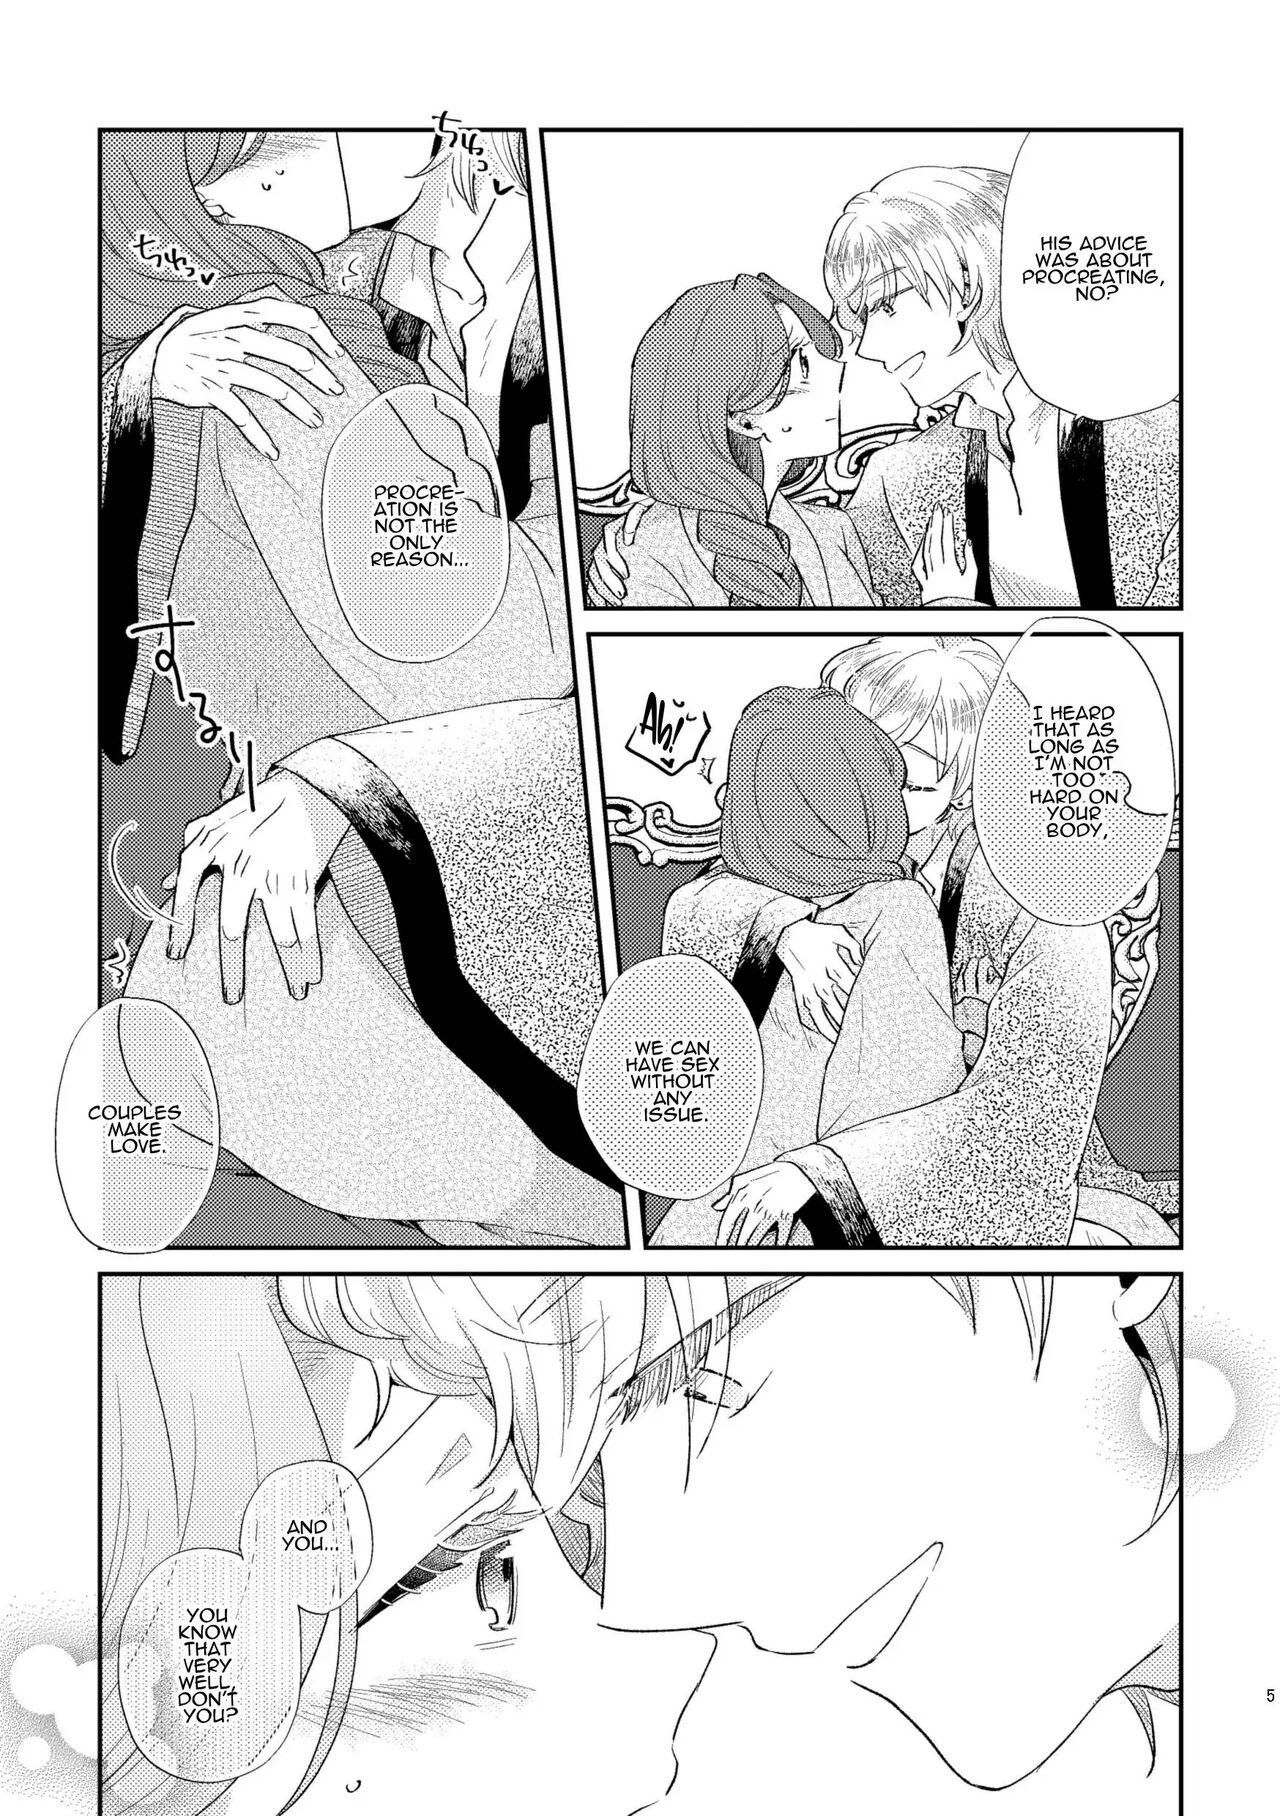 Leche Shounen Ou to Toshiue Ouhi EverAfter | The Boy King and His Older Queen EverAfter Wives - Page 7